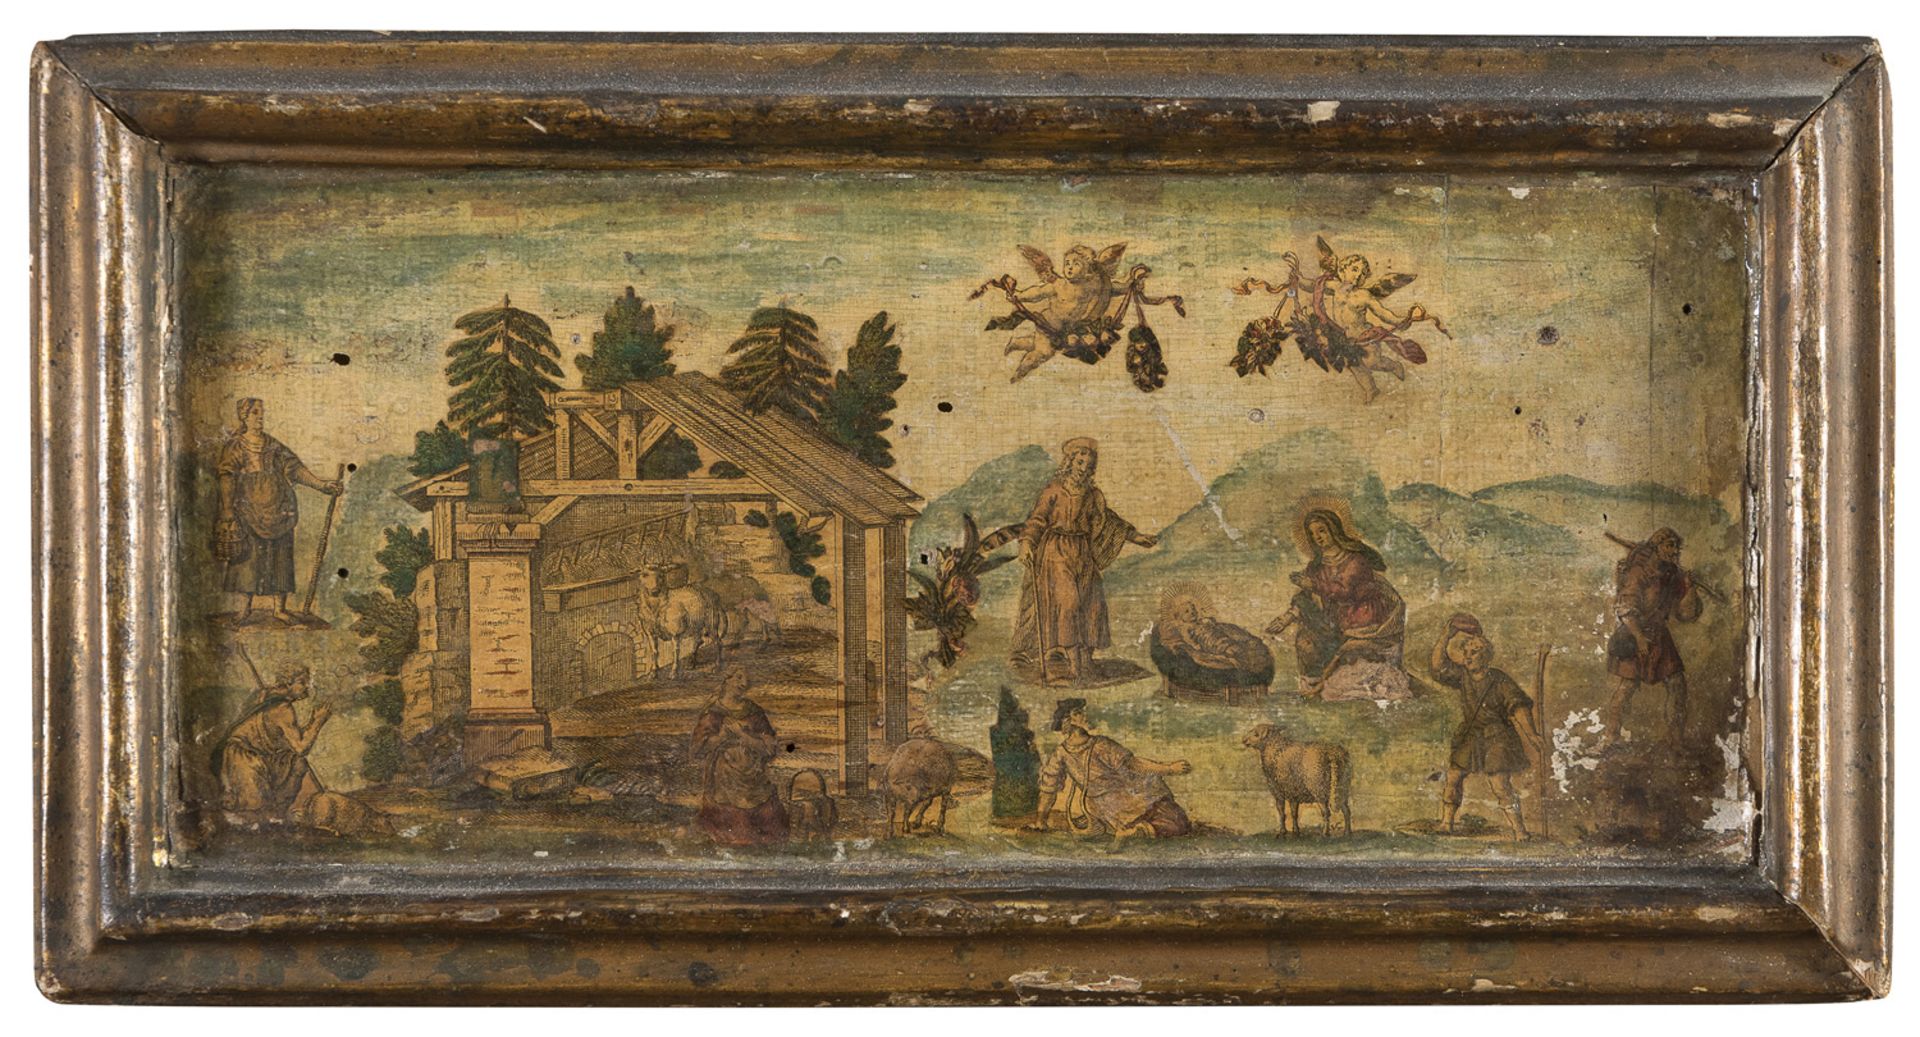 COLLAGE OF PAINTED ENGRAVINGS DEPICTING NATIVITY 18TH CENTURY